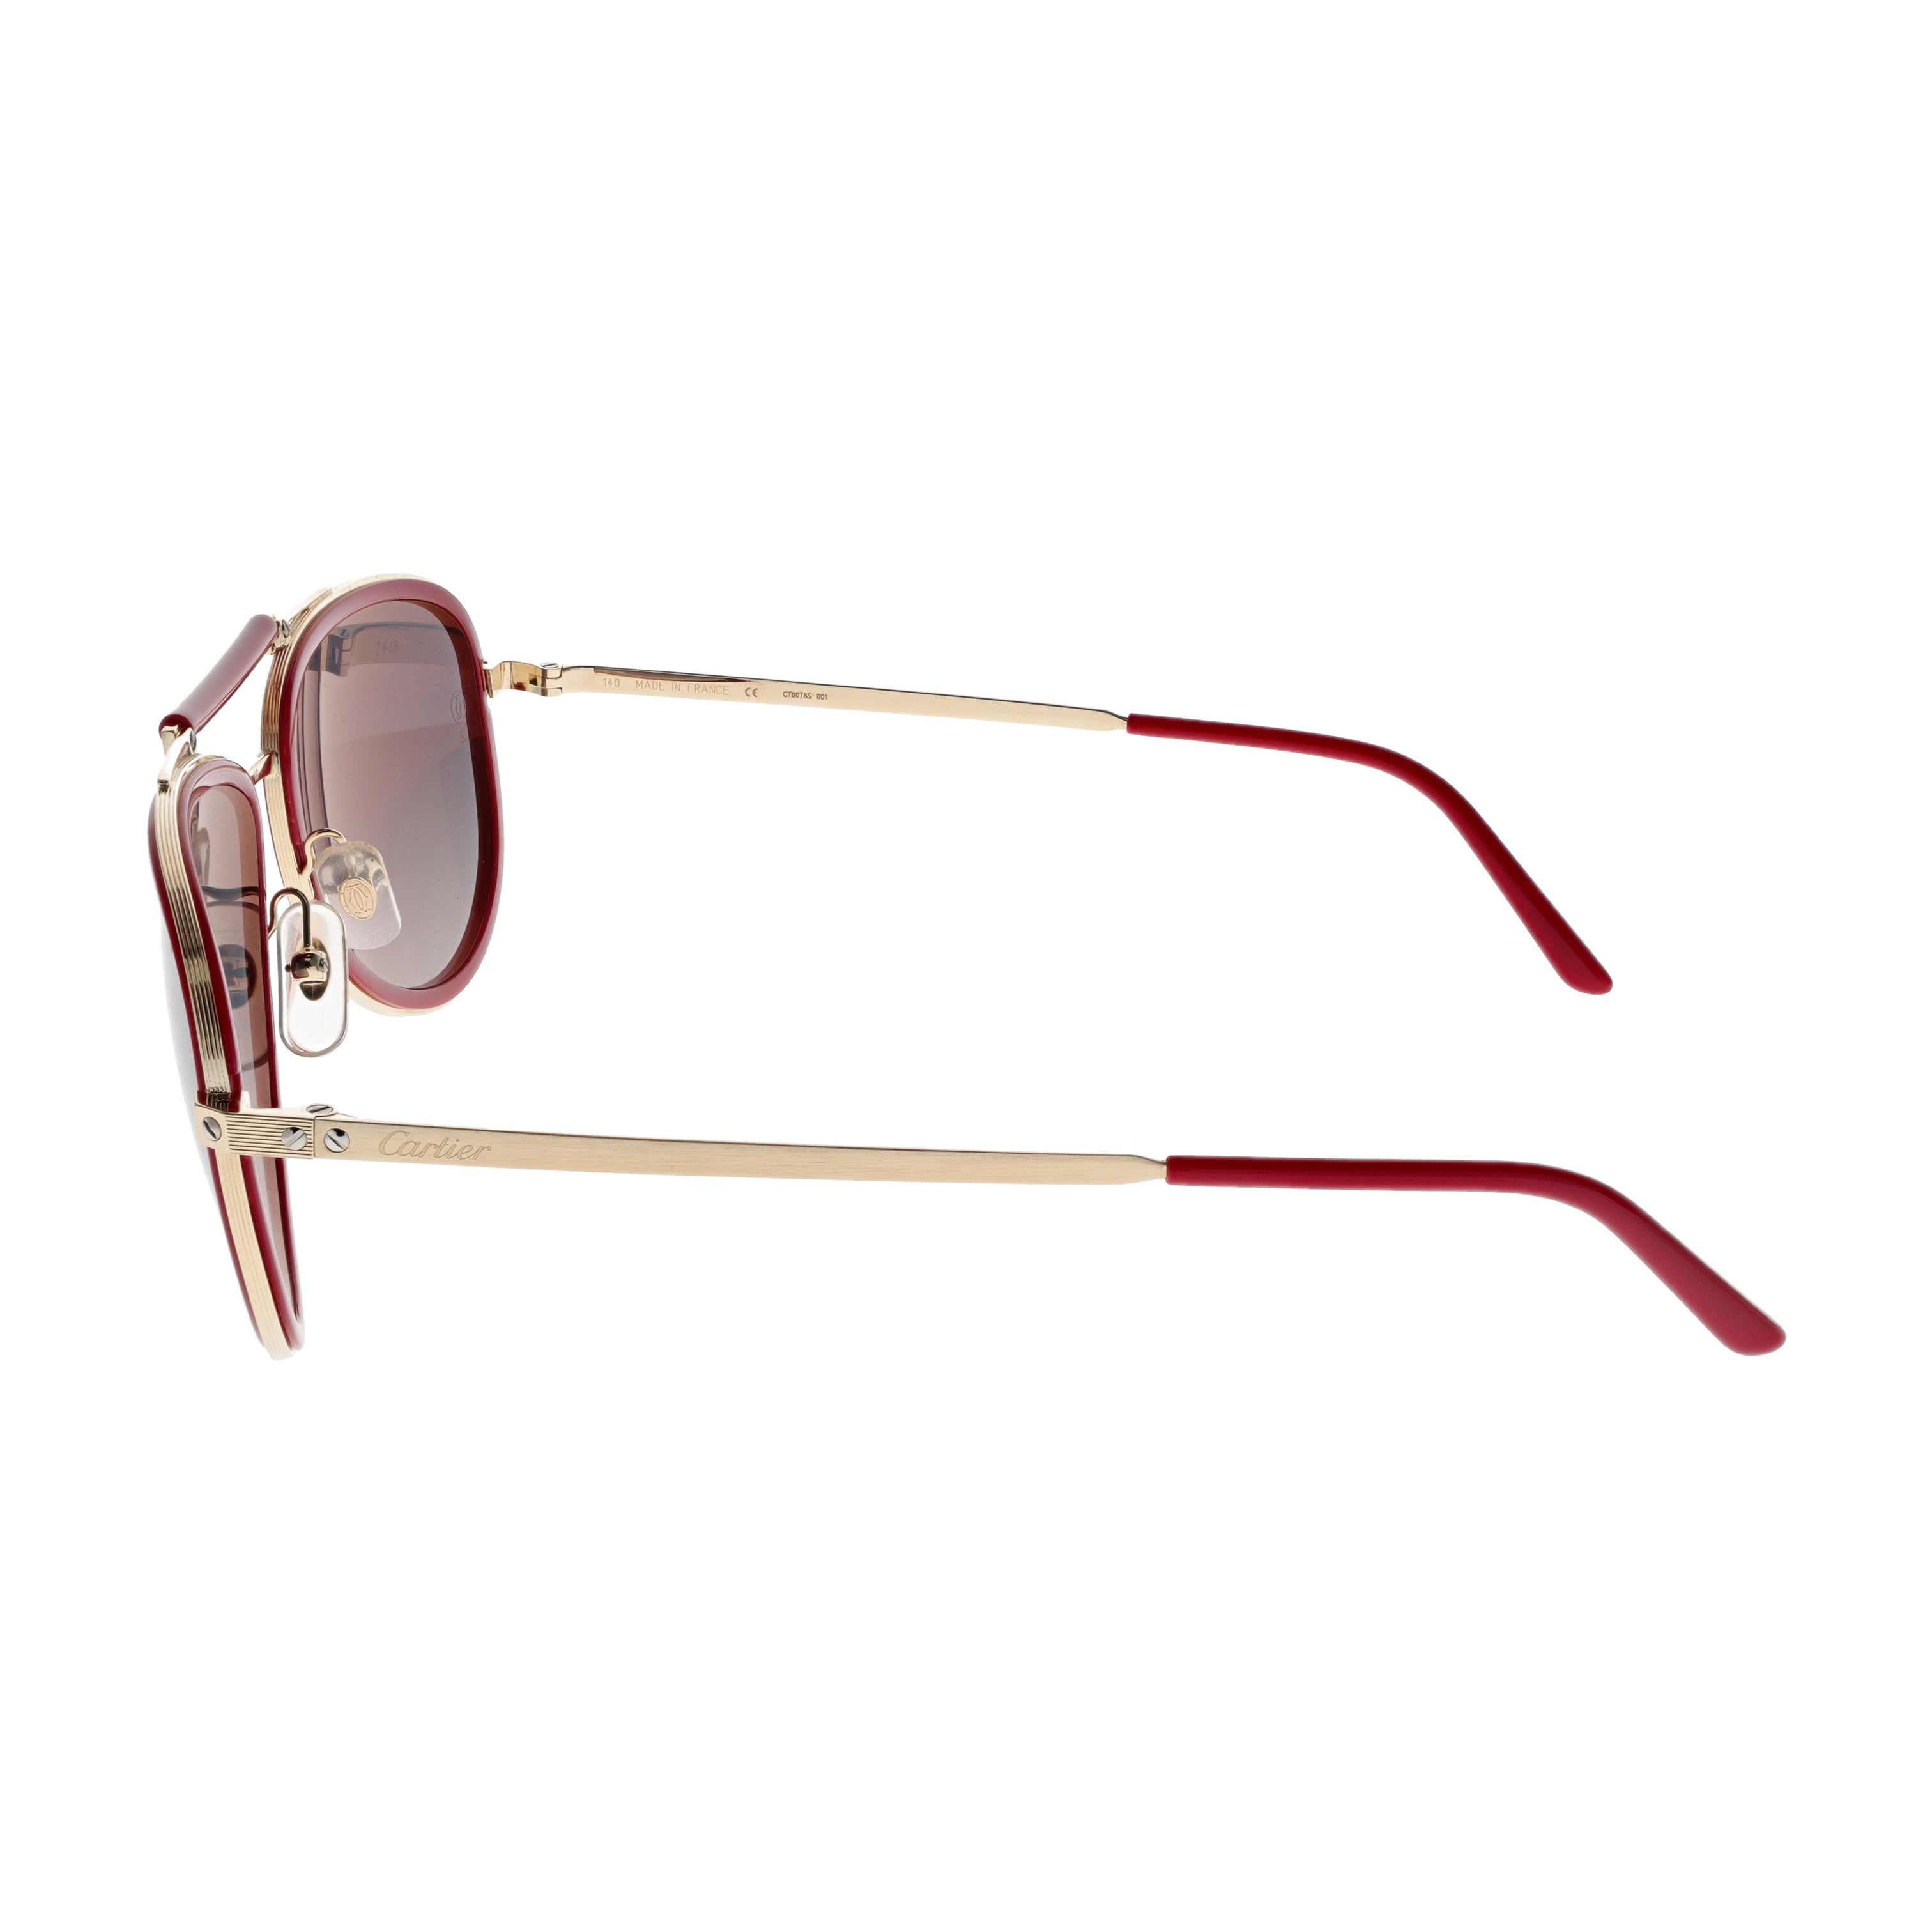 Cartier Sunglasses - CT0078S-001 - Red / Gold